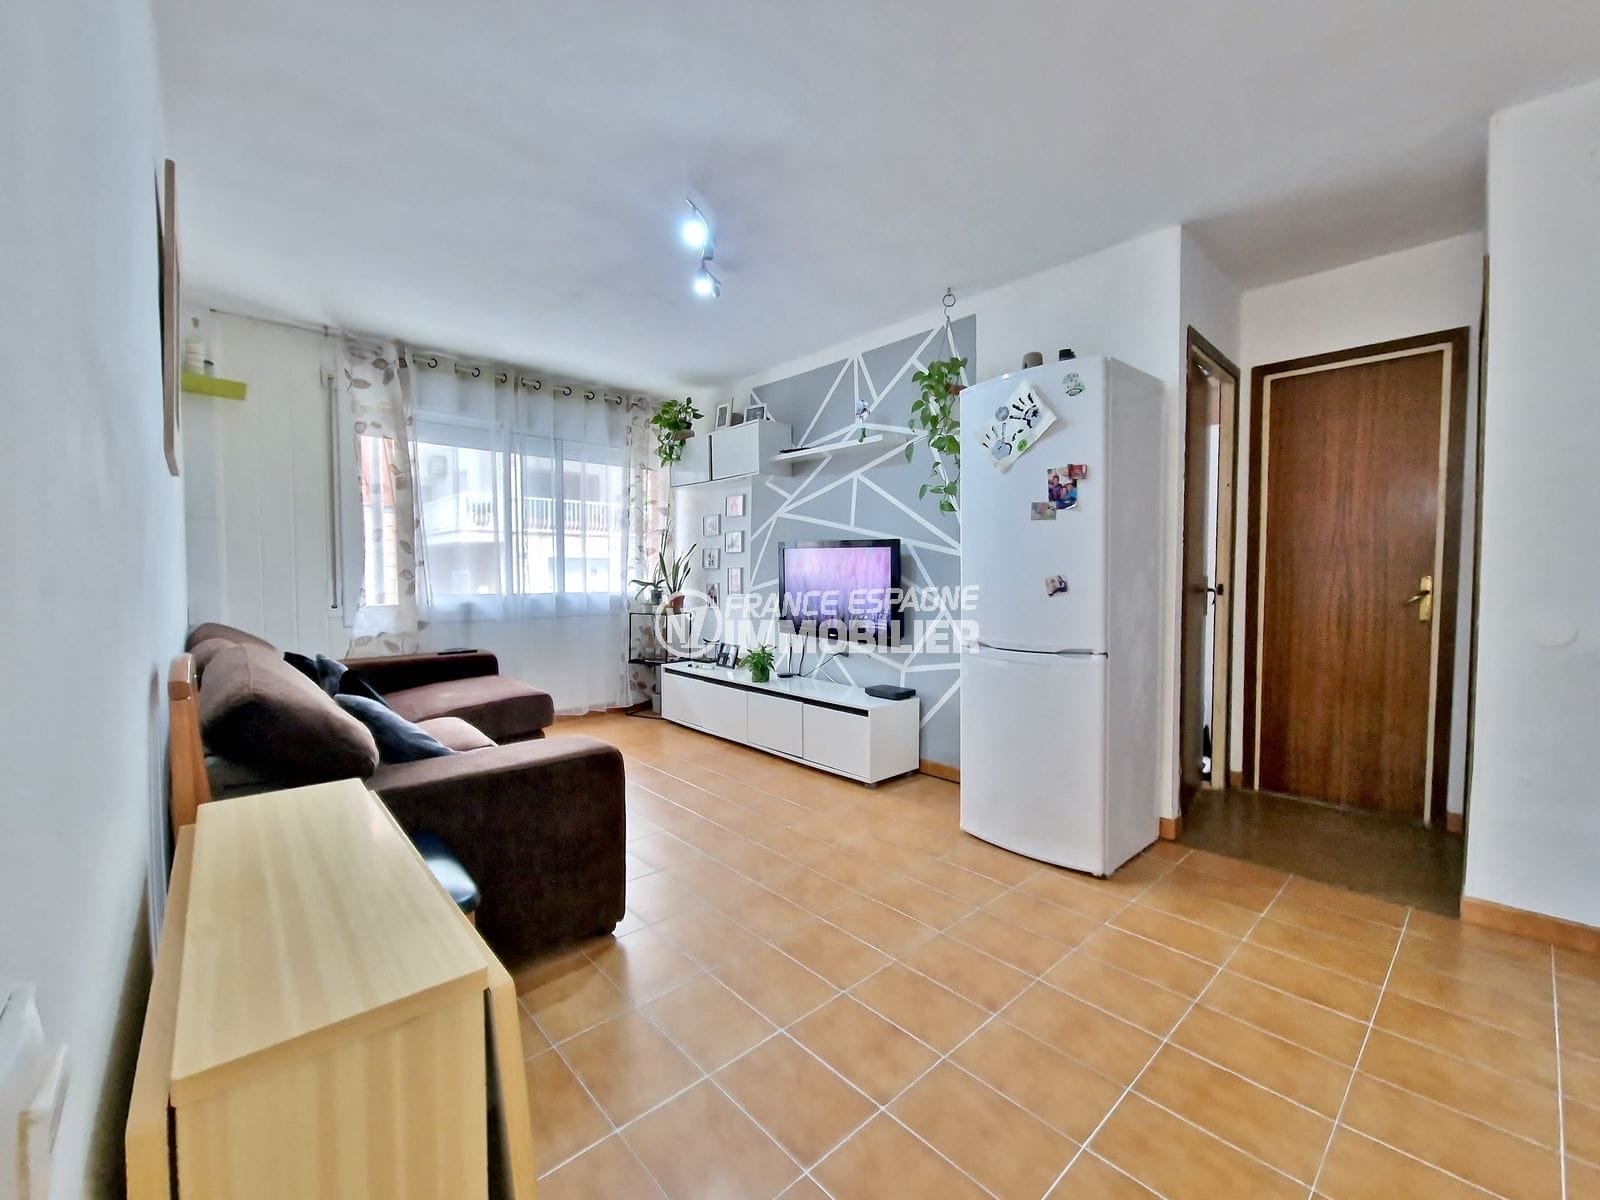 Roses - renovated 2-bedroom apartment, 350m from the beach in the town center